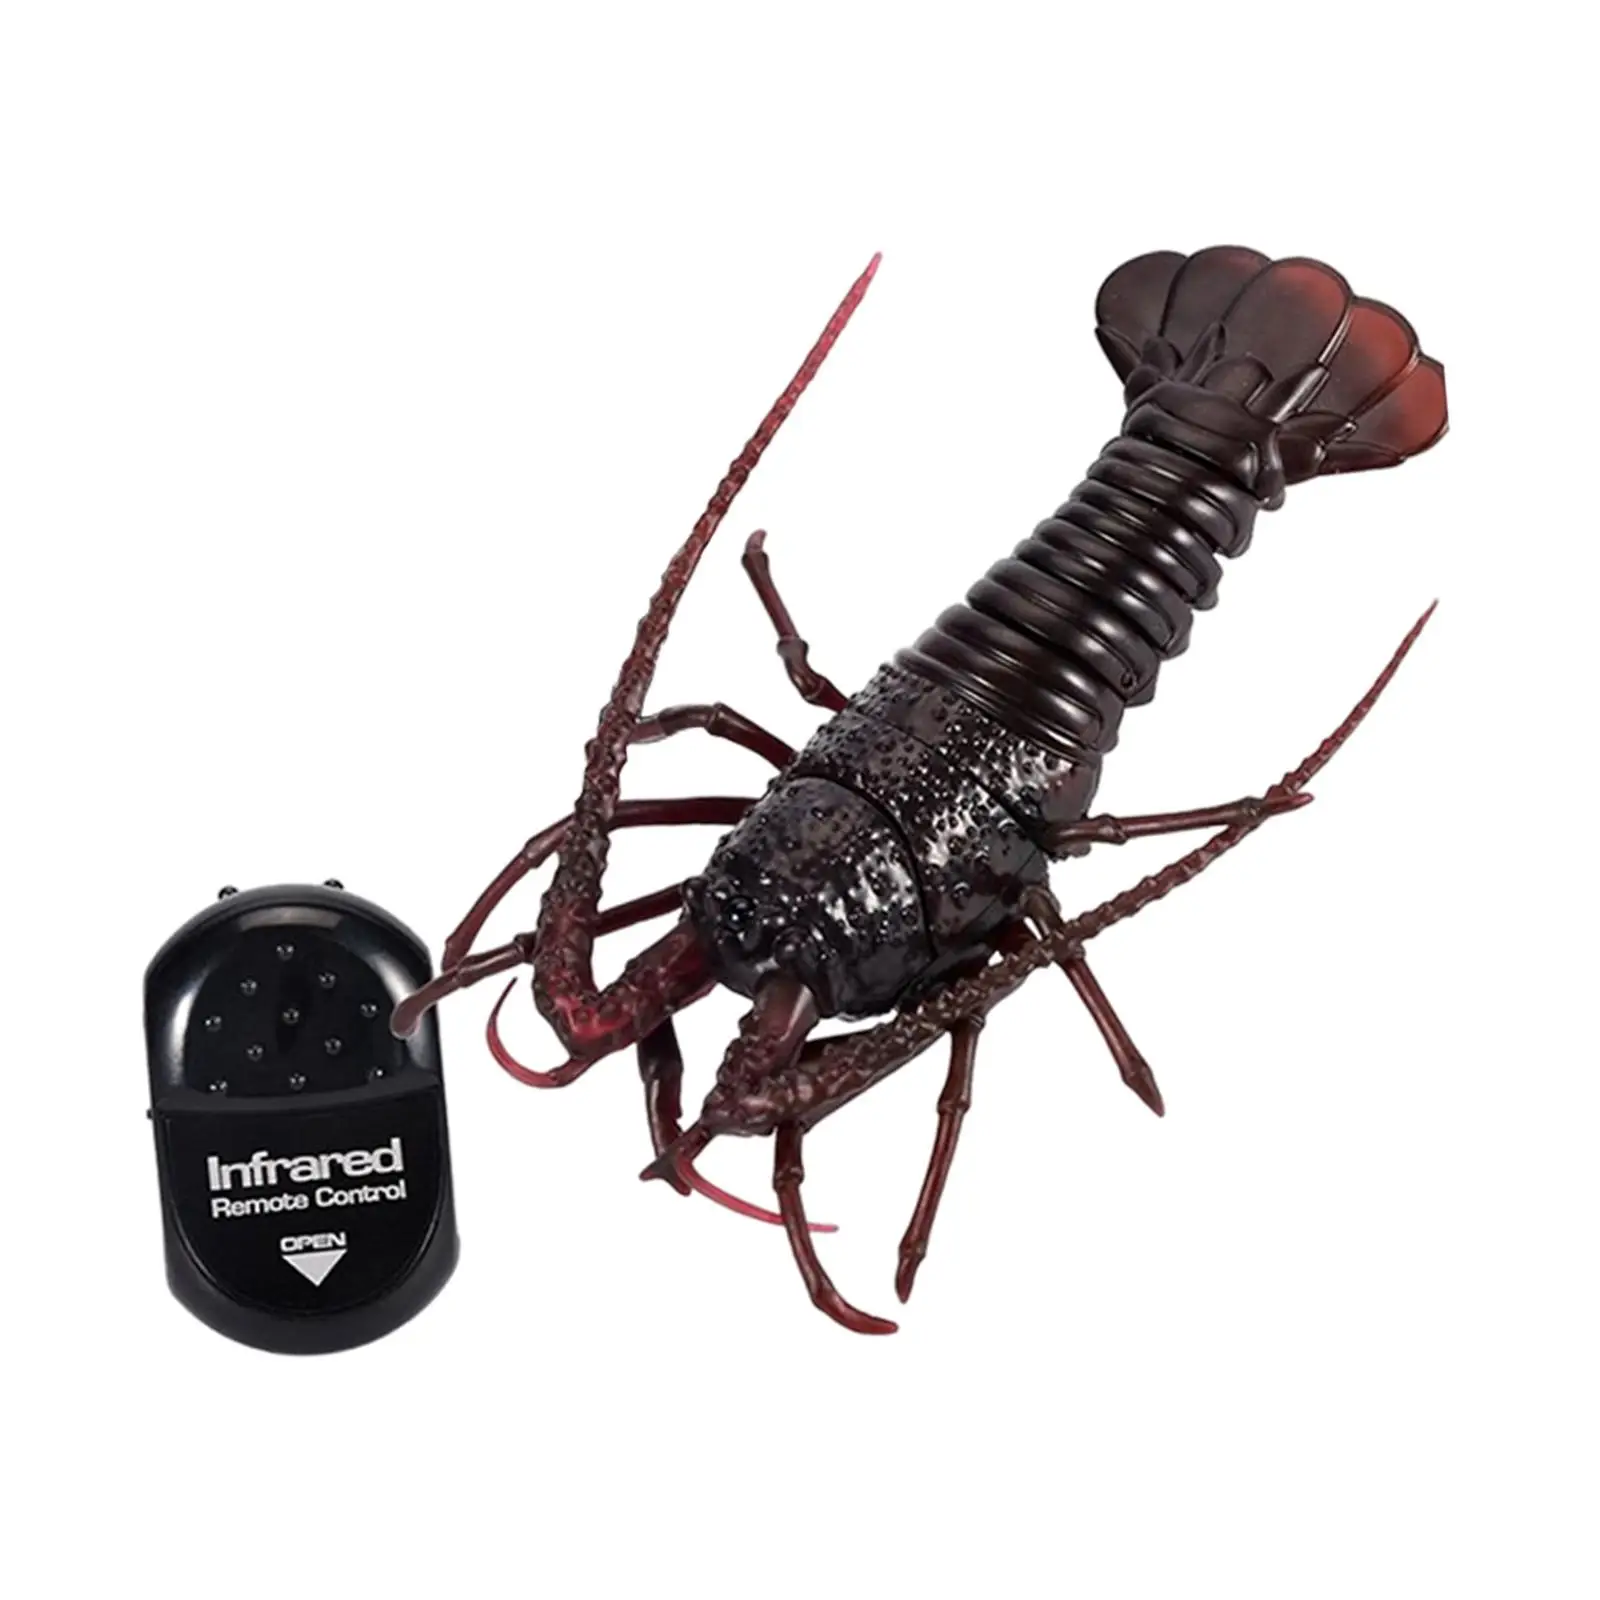 Remote Control Crawfish Toy Realistic Remote Control Vehicle Car Animal Joke Toys Electric Infrared RC Shrimp for Children Gifts